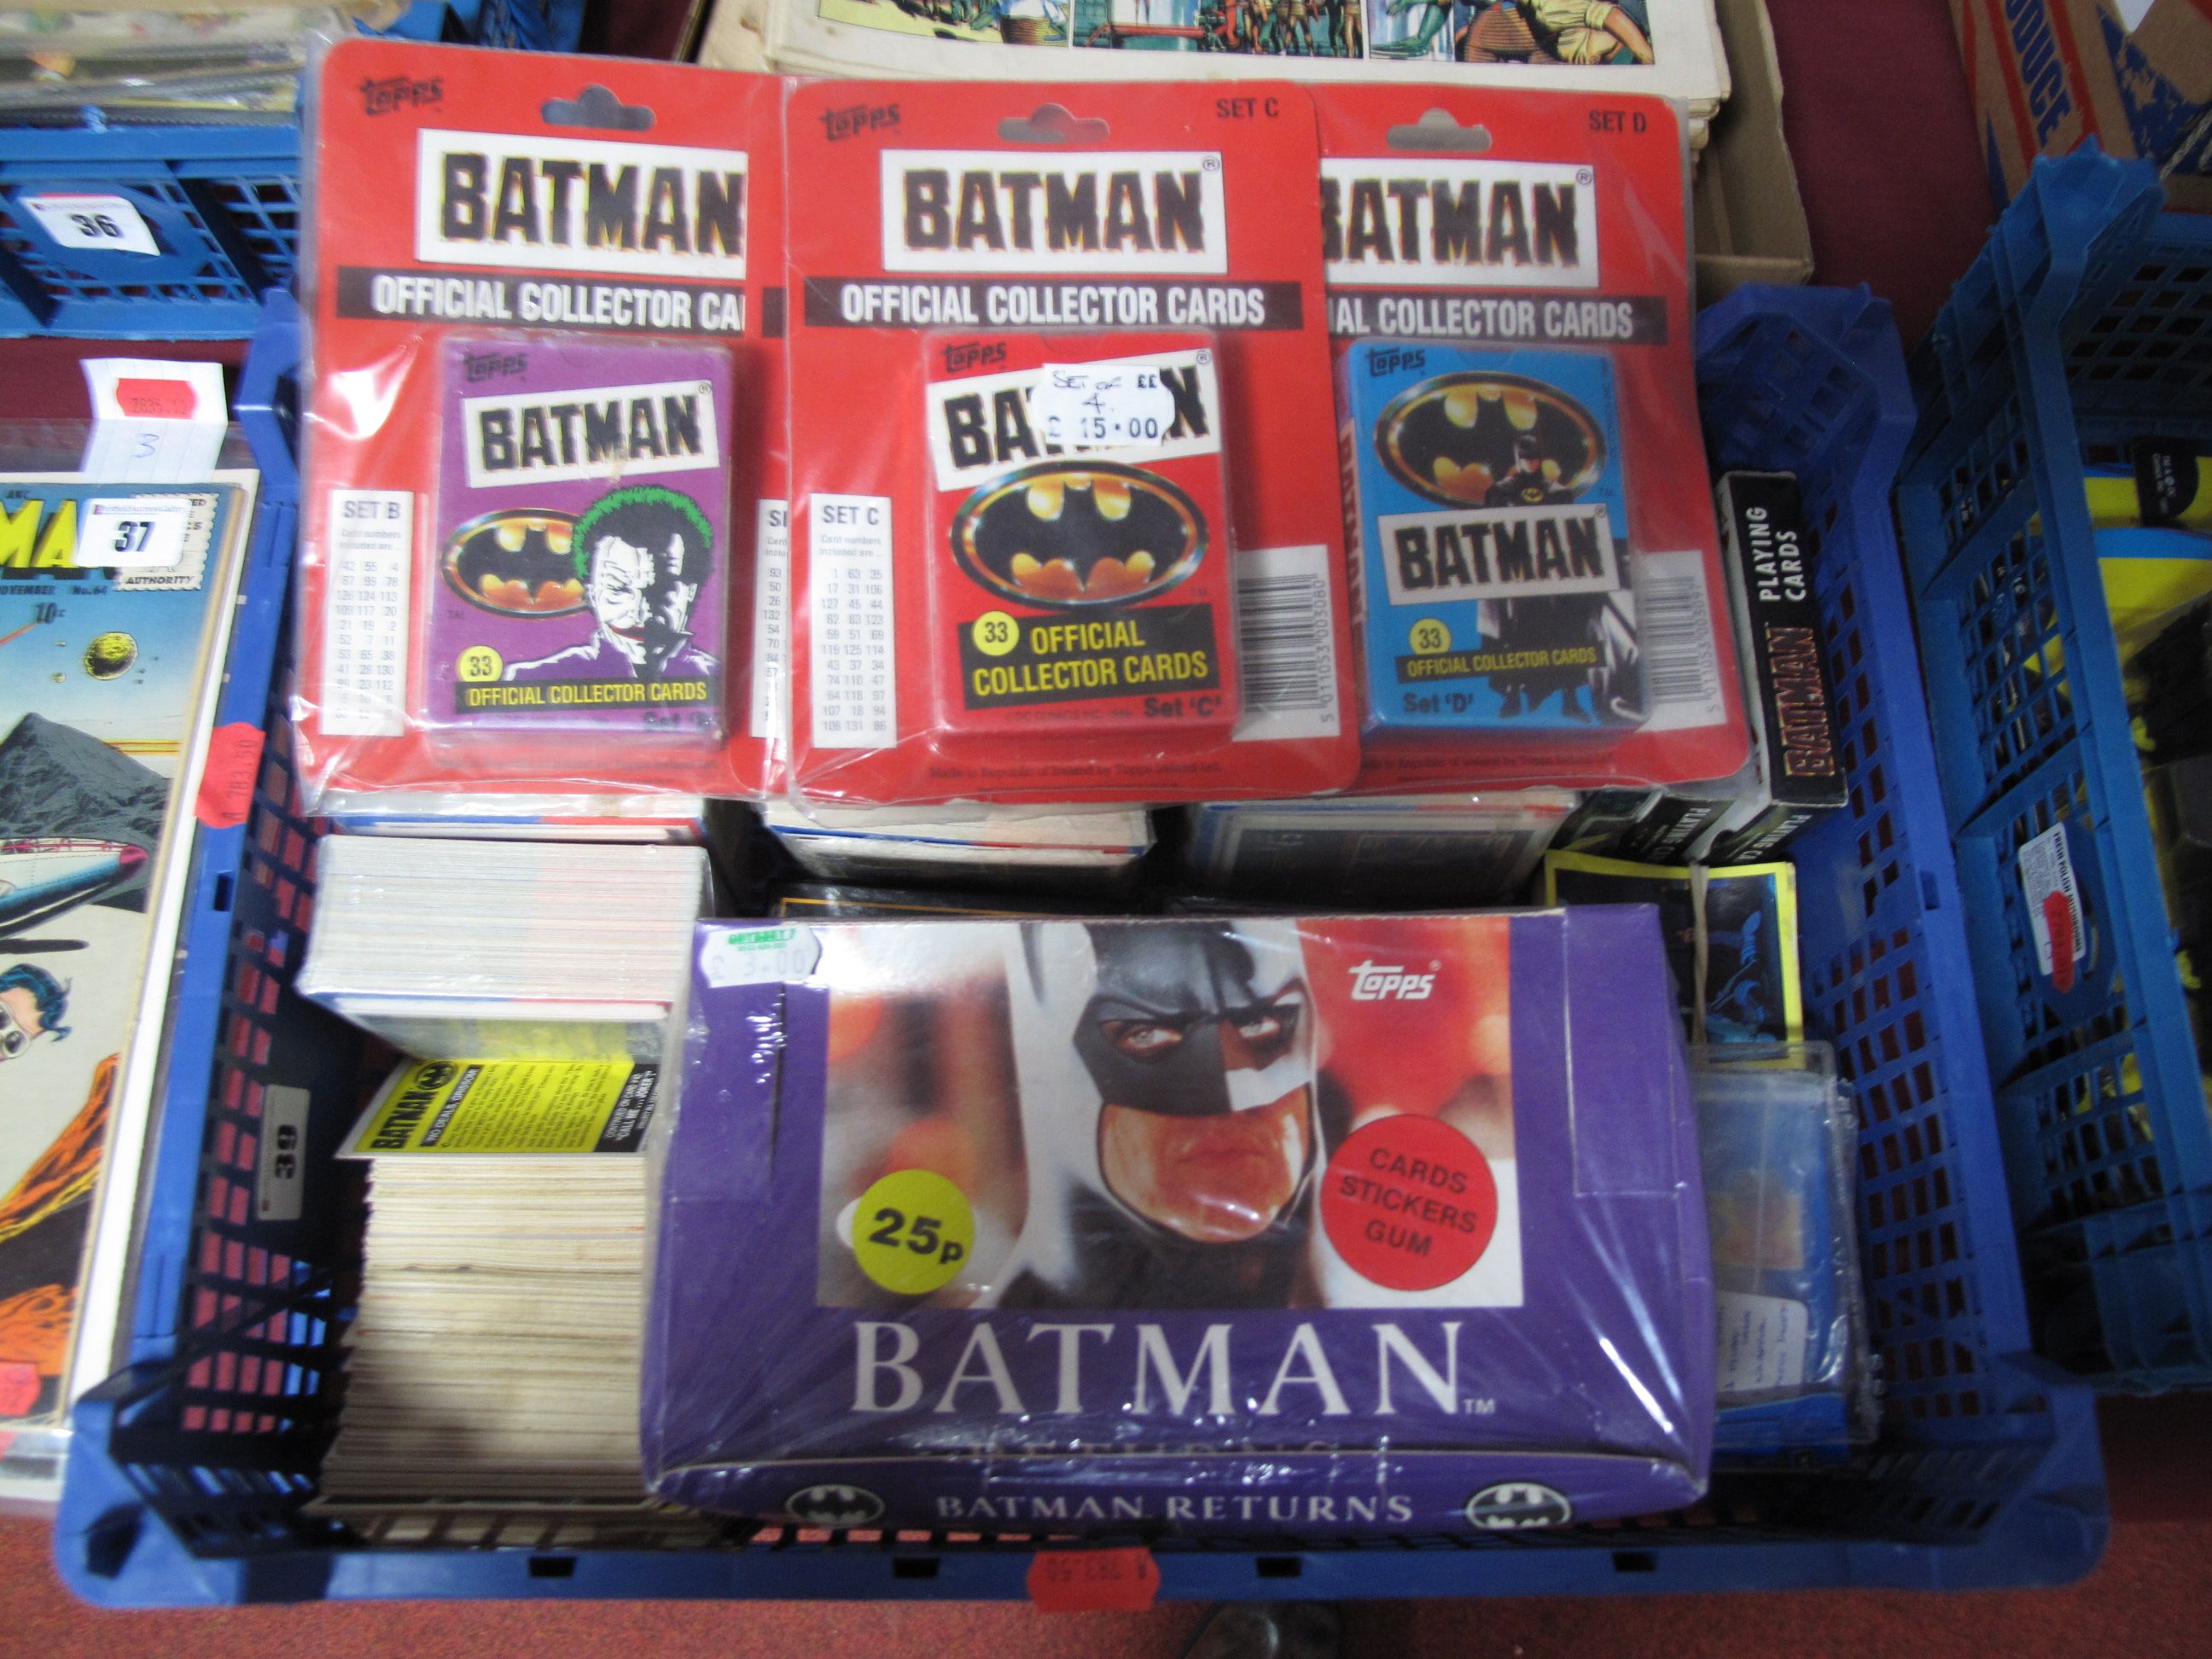 A large Quantity of Topps Batman Trading Cards, from 1989 and Batman Returns series, with seven